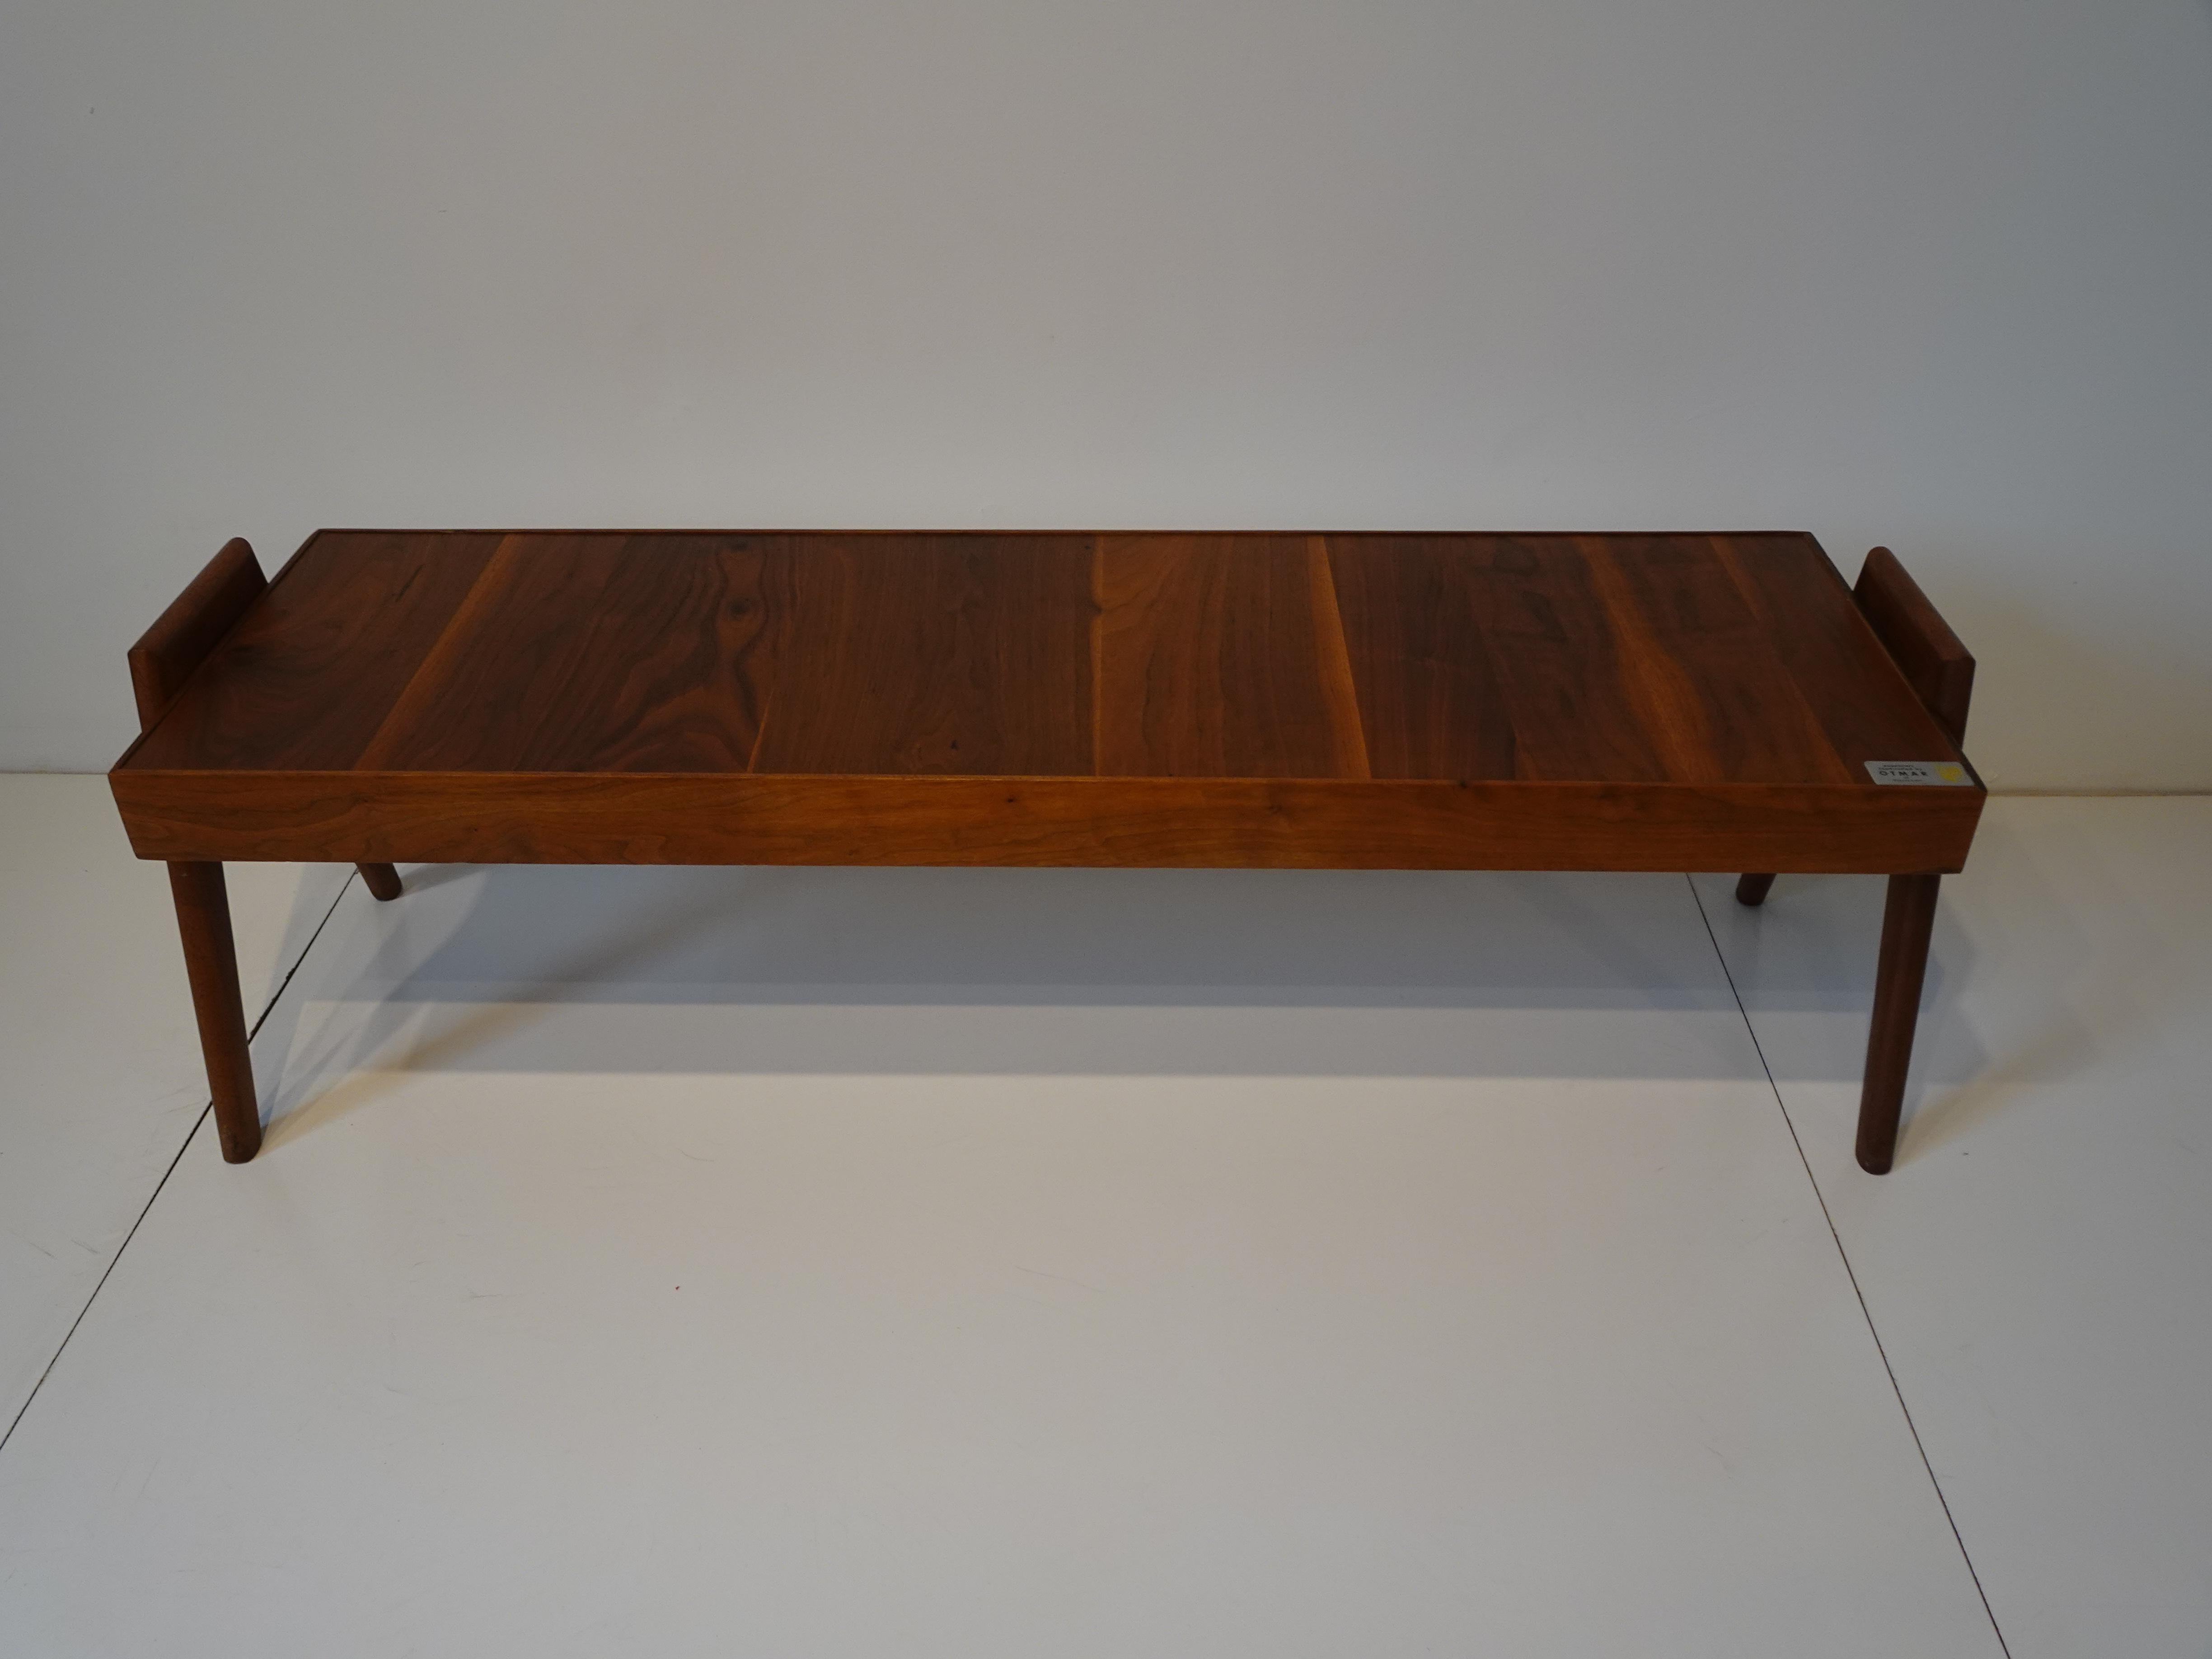 A very well crafted teak wood coffee table with sliding upper top server all sitting on compass styled legs in the manner of Svend Aage Madsen. Retains the manufactures label of a well known Danish furniture craftsman from the Cincinnati area who